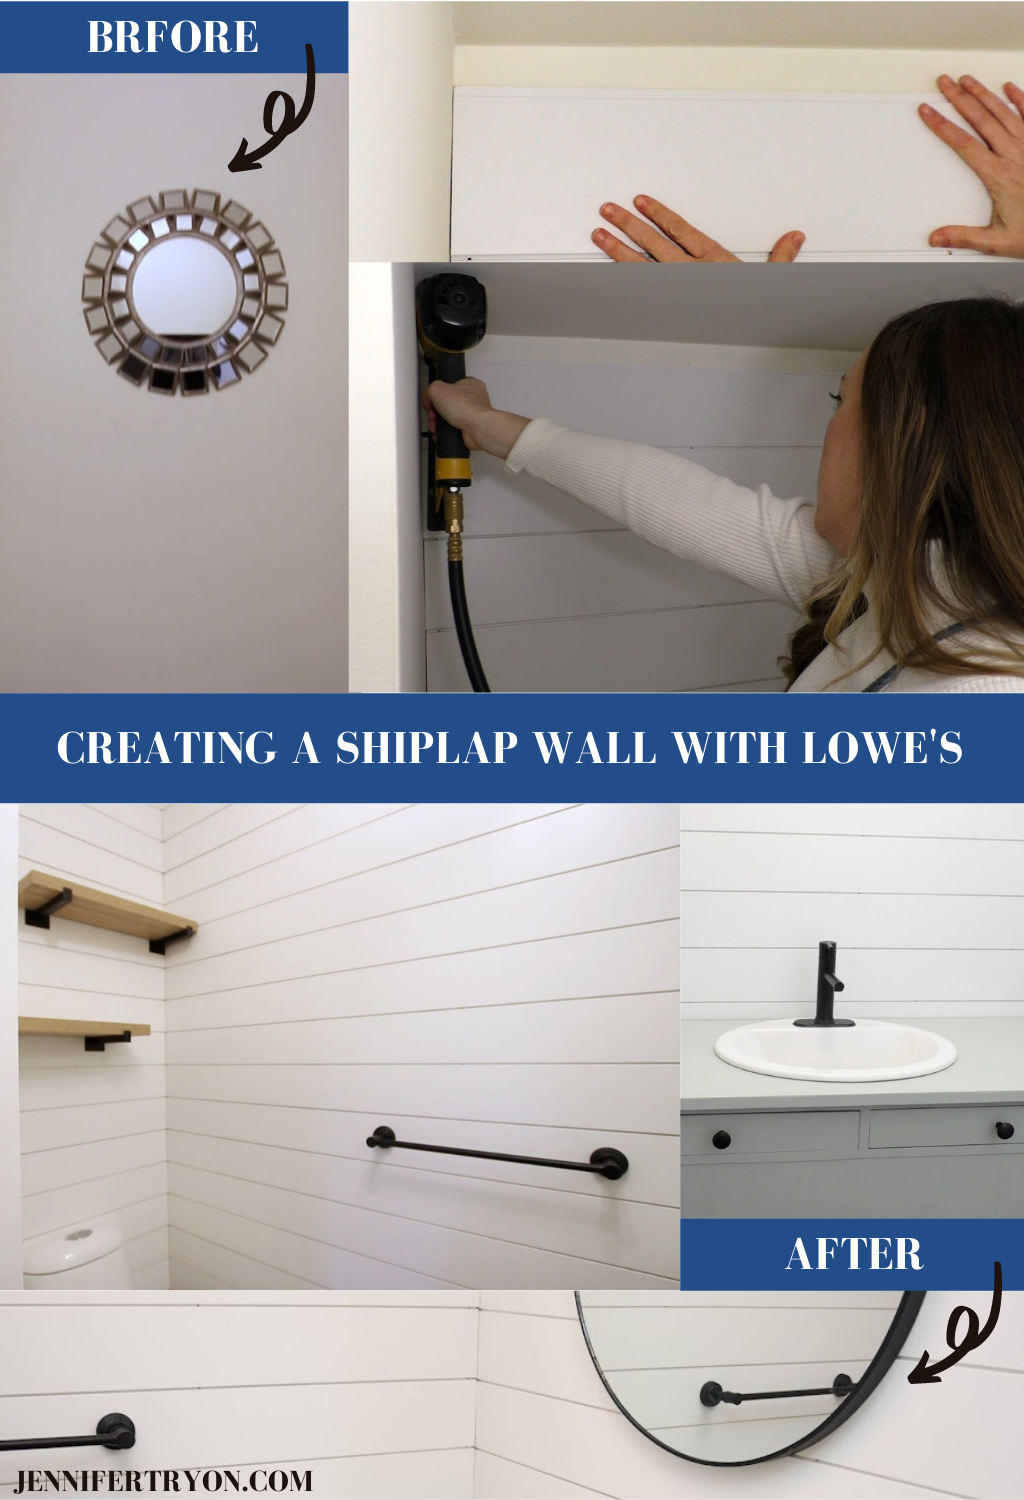 creating a shiplap wall with lowe's